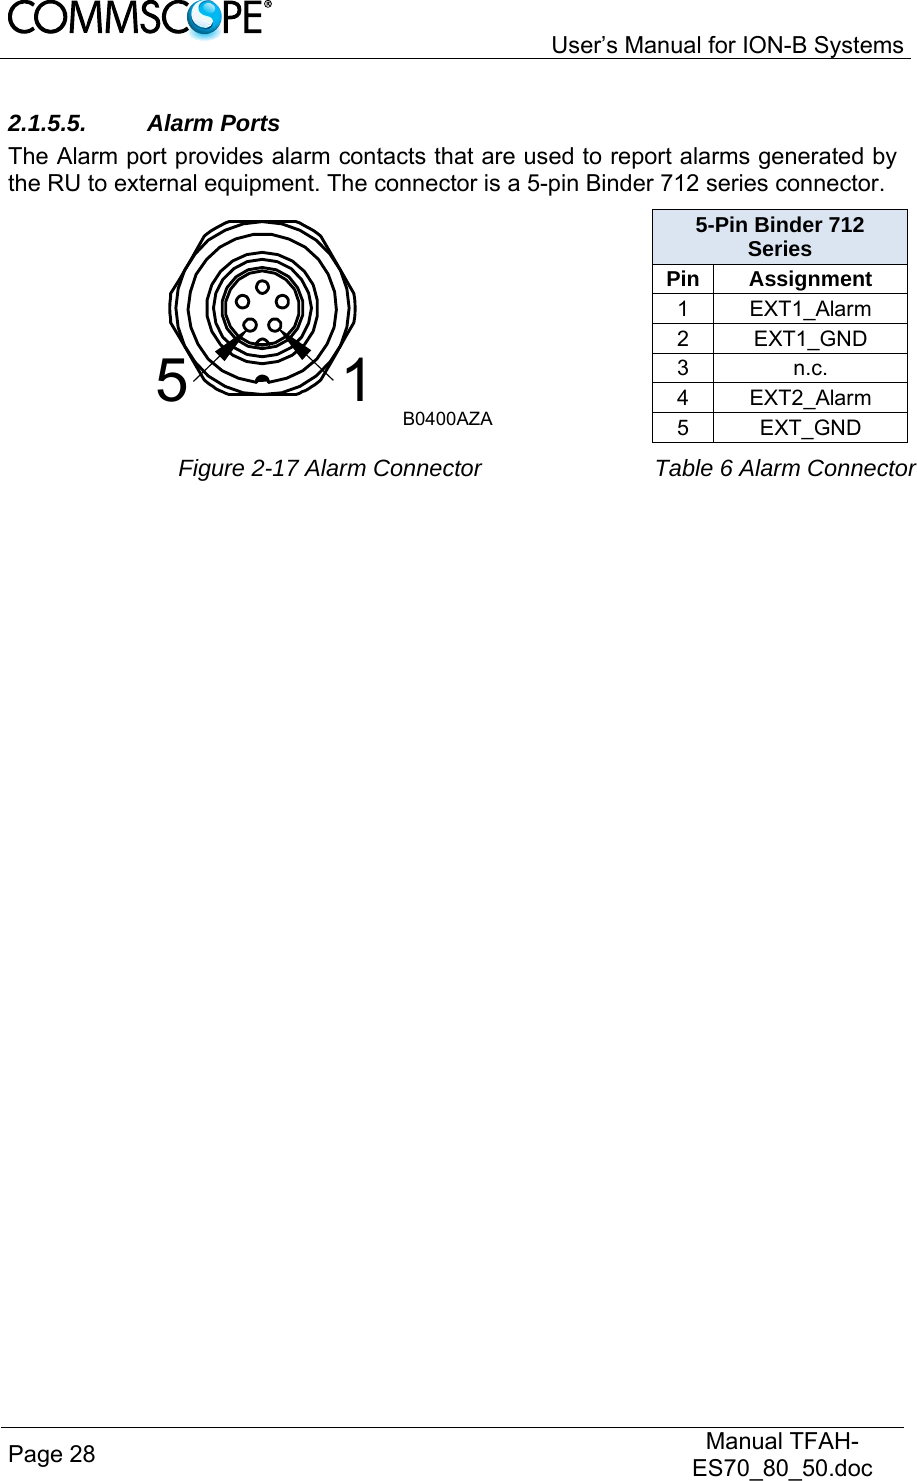   User’s Manual for ION-B Systems Page 28   Manual TFAH-ES70_80_50.doc  2.1.5.5. Alarm Ports The Alarm port provides alarm contacts that are used to report alarms generated by the RU to external equipment. The connector is a 5-pin Binder 712 series connector. 51B0400AZA 5-Pin Binder 712 Series Pin Assignment 1 EXT1_Alarm 2 EXT1_GND 3 n.c. 4 EXT2_Alarm 5 EXT_GND  Figure 2-17 Alarm Connector Table 6 Alarm Connector